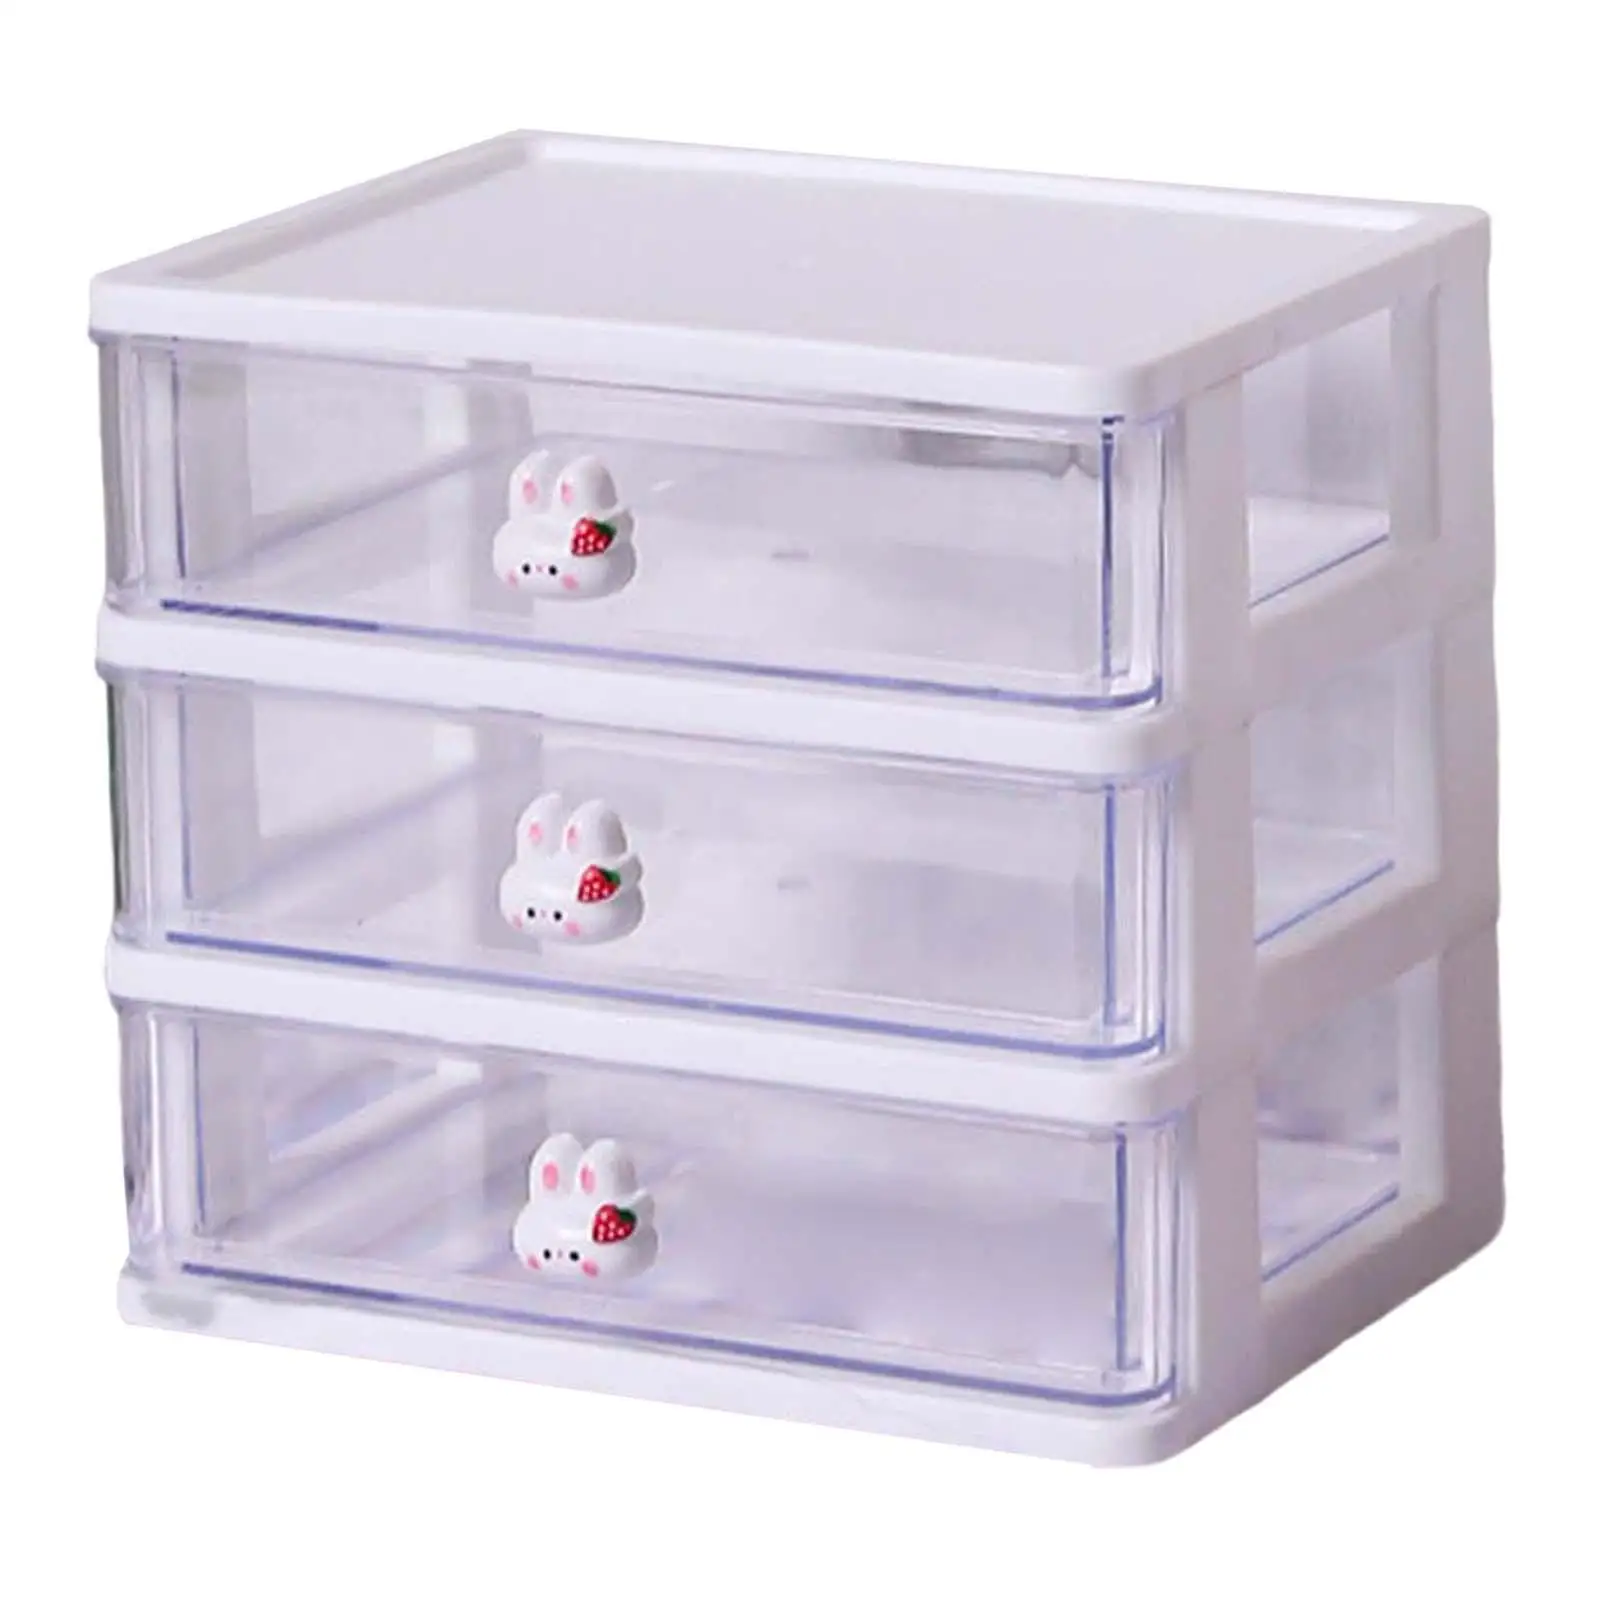 Desktop Drawer Organizer Compartments Storage Drawers Case Stackable for Home Bathroom